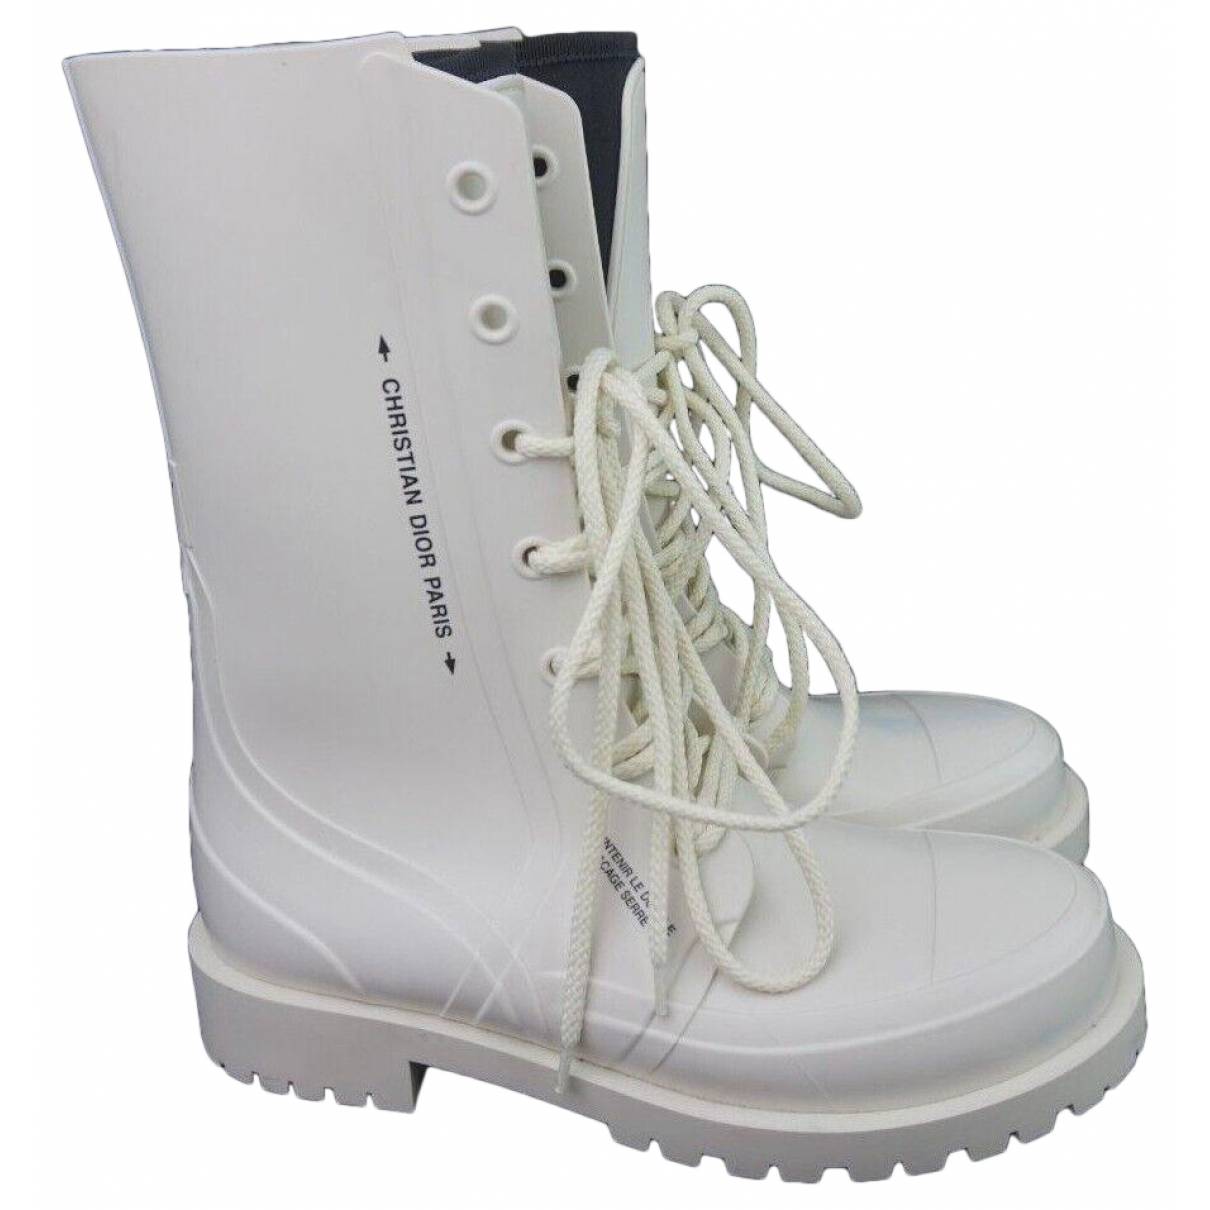 Dior Women's White Camp Rubber Combat Boots Size 39